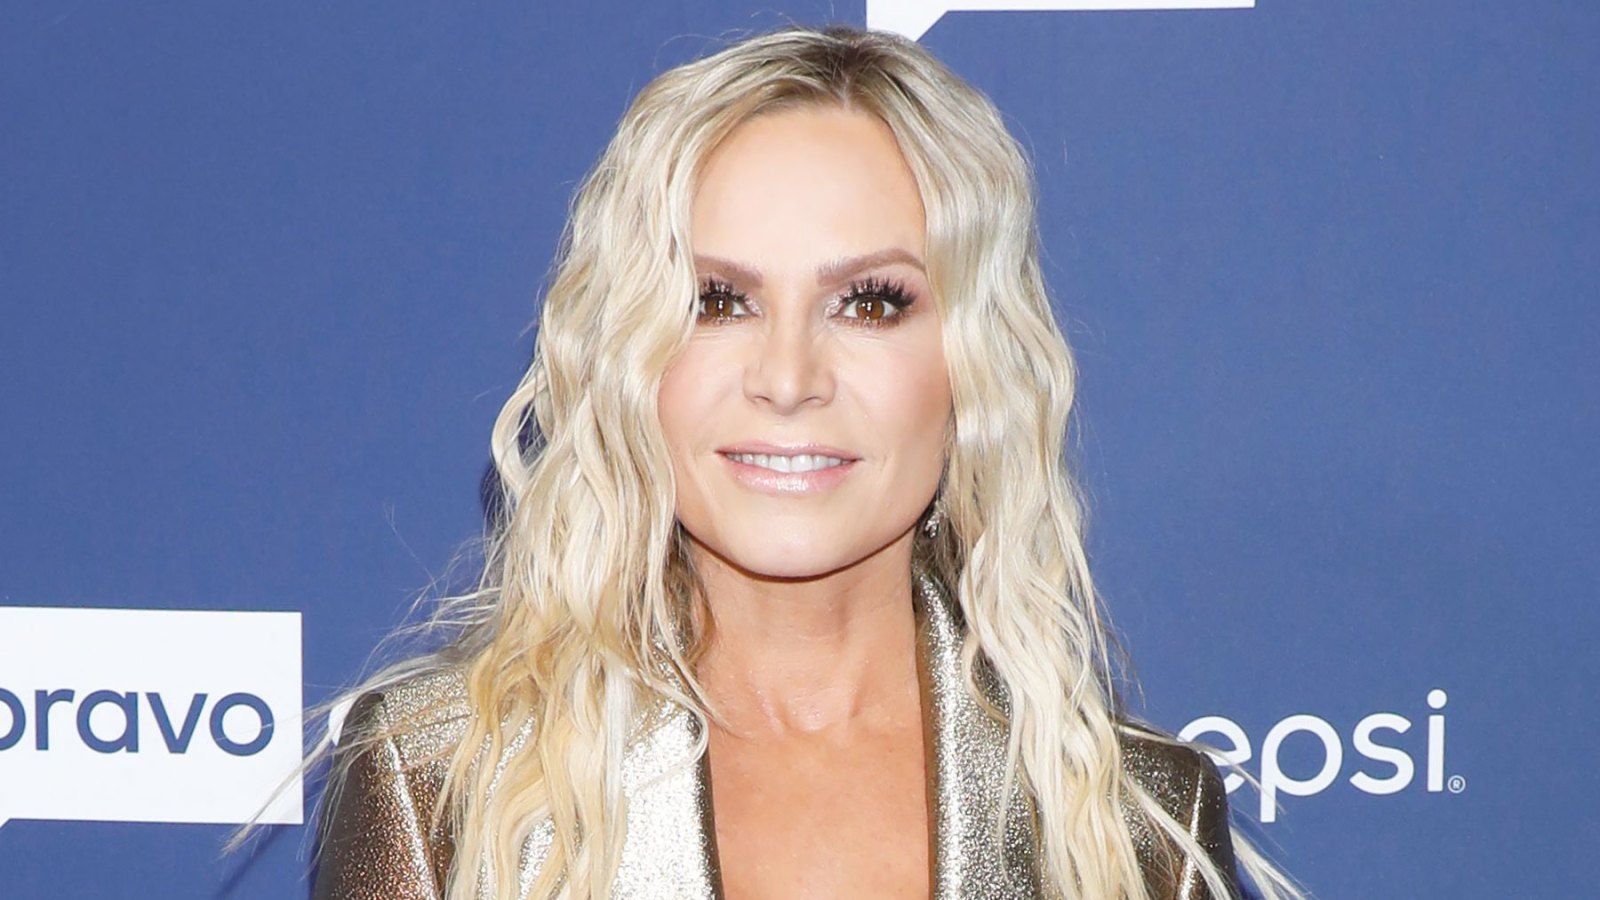 RHOC’s Tamra Judge Is ‘Excited’ About Tackling Real Estate Journey